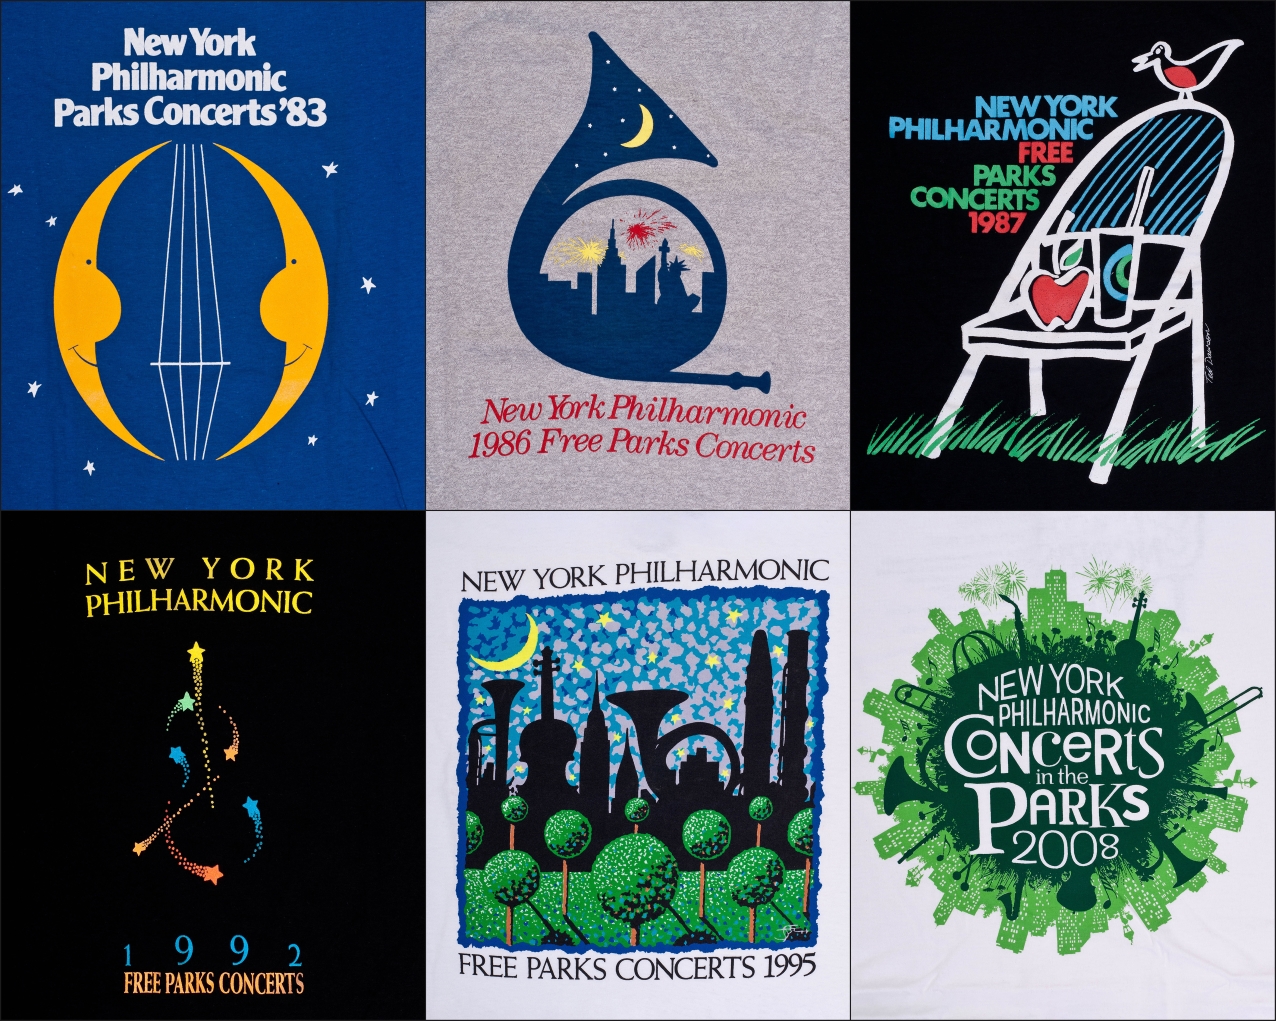 Different t-shirt designs for the New York Philharmonic's Concerts in the Parks